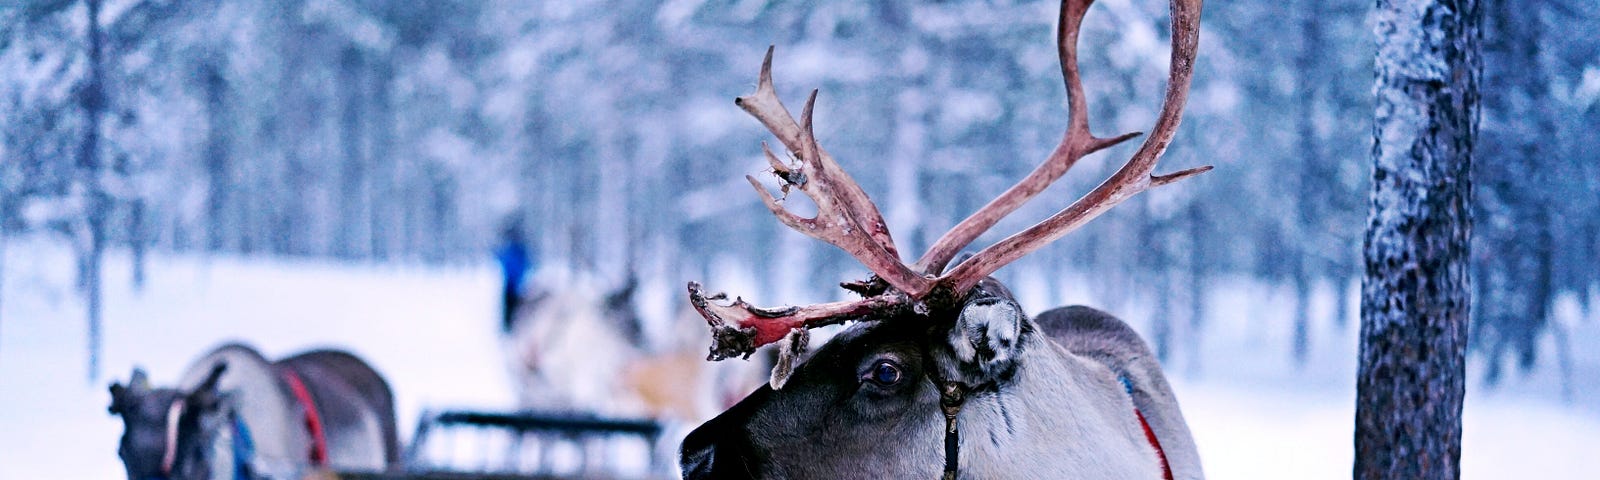 Reindeer in the snow pulling a sled.